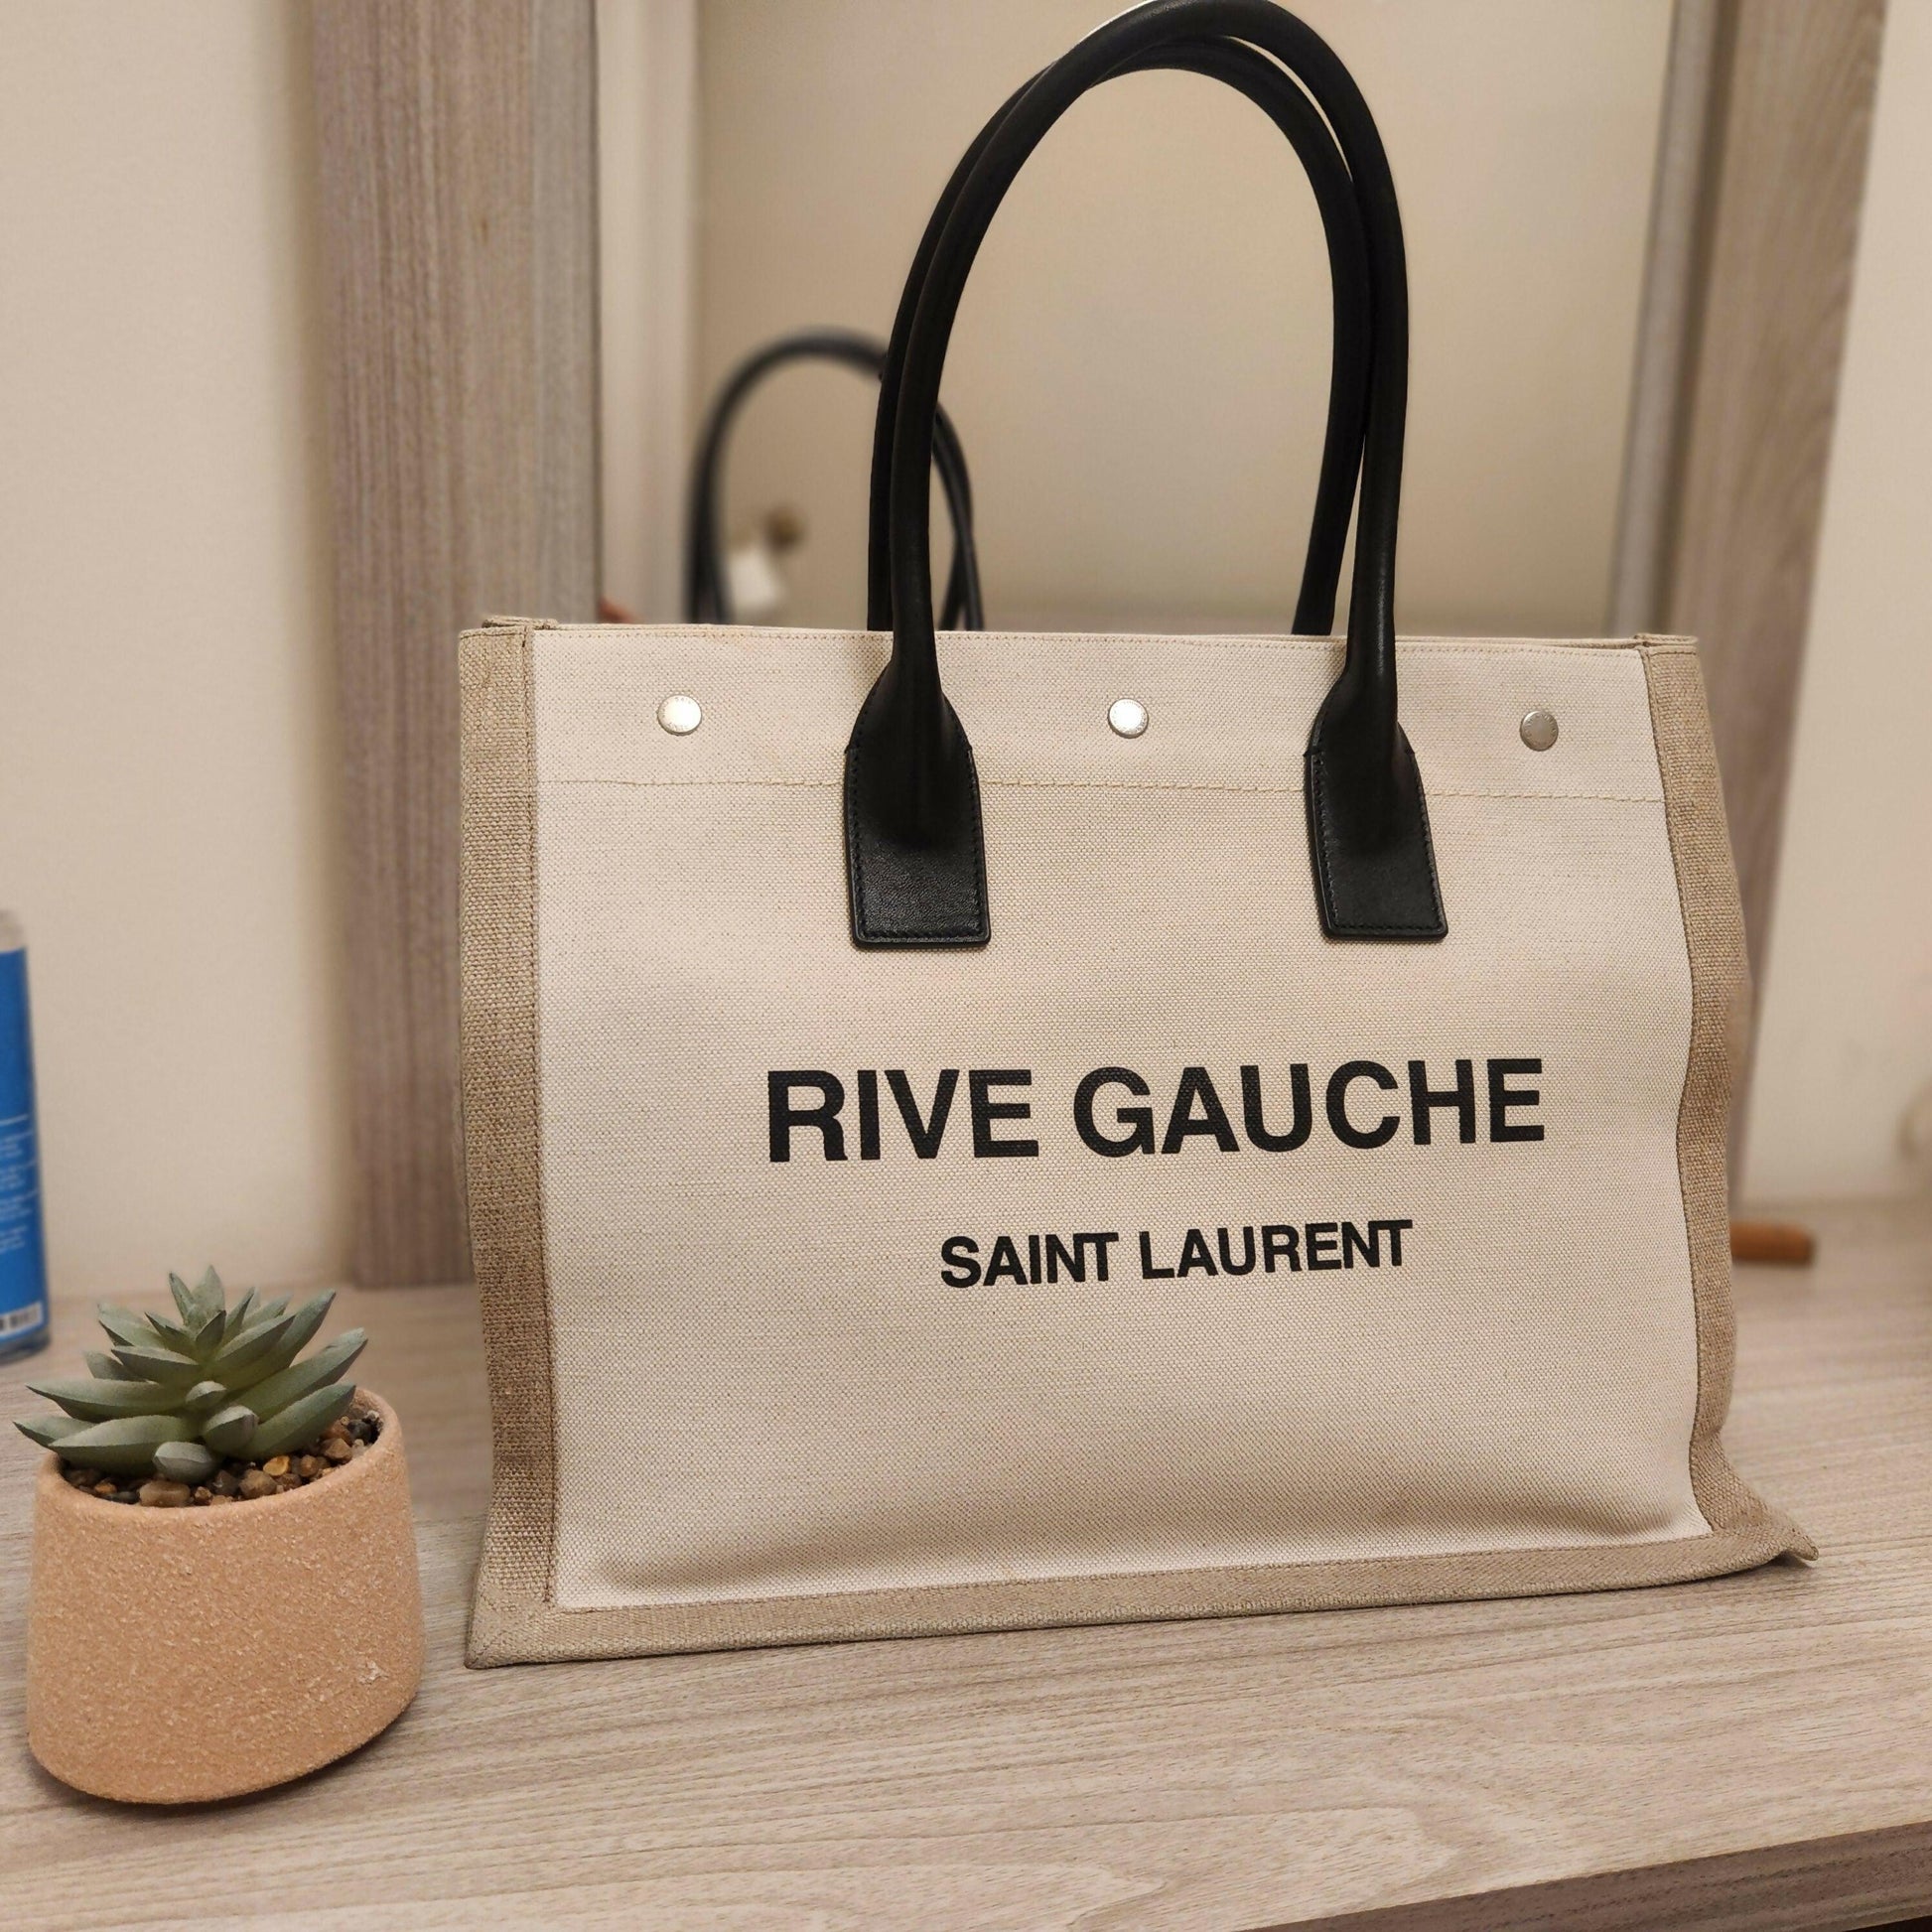 Rive Gauche Tote Bag in Linen & Leather - Endless